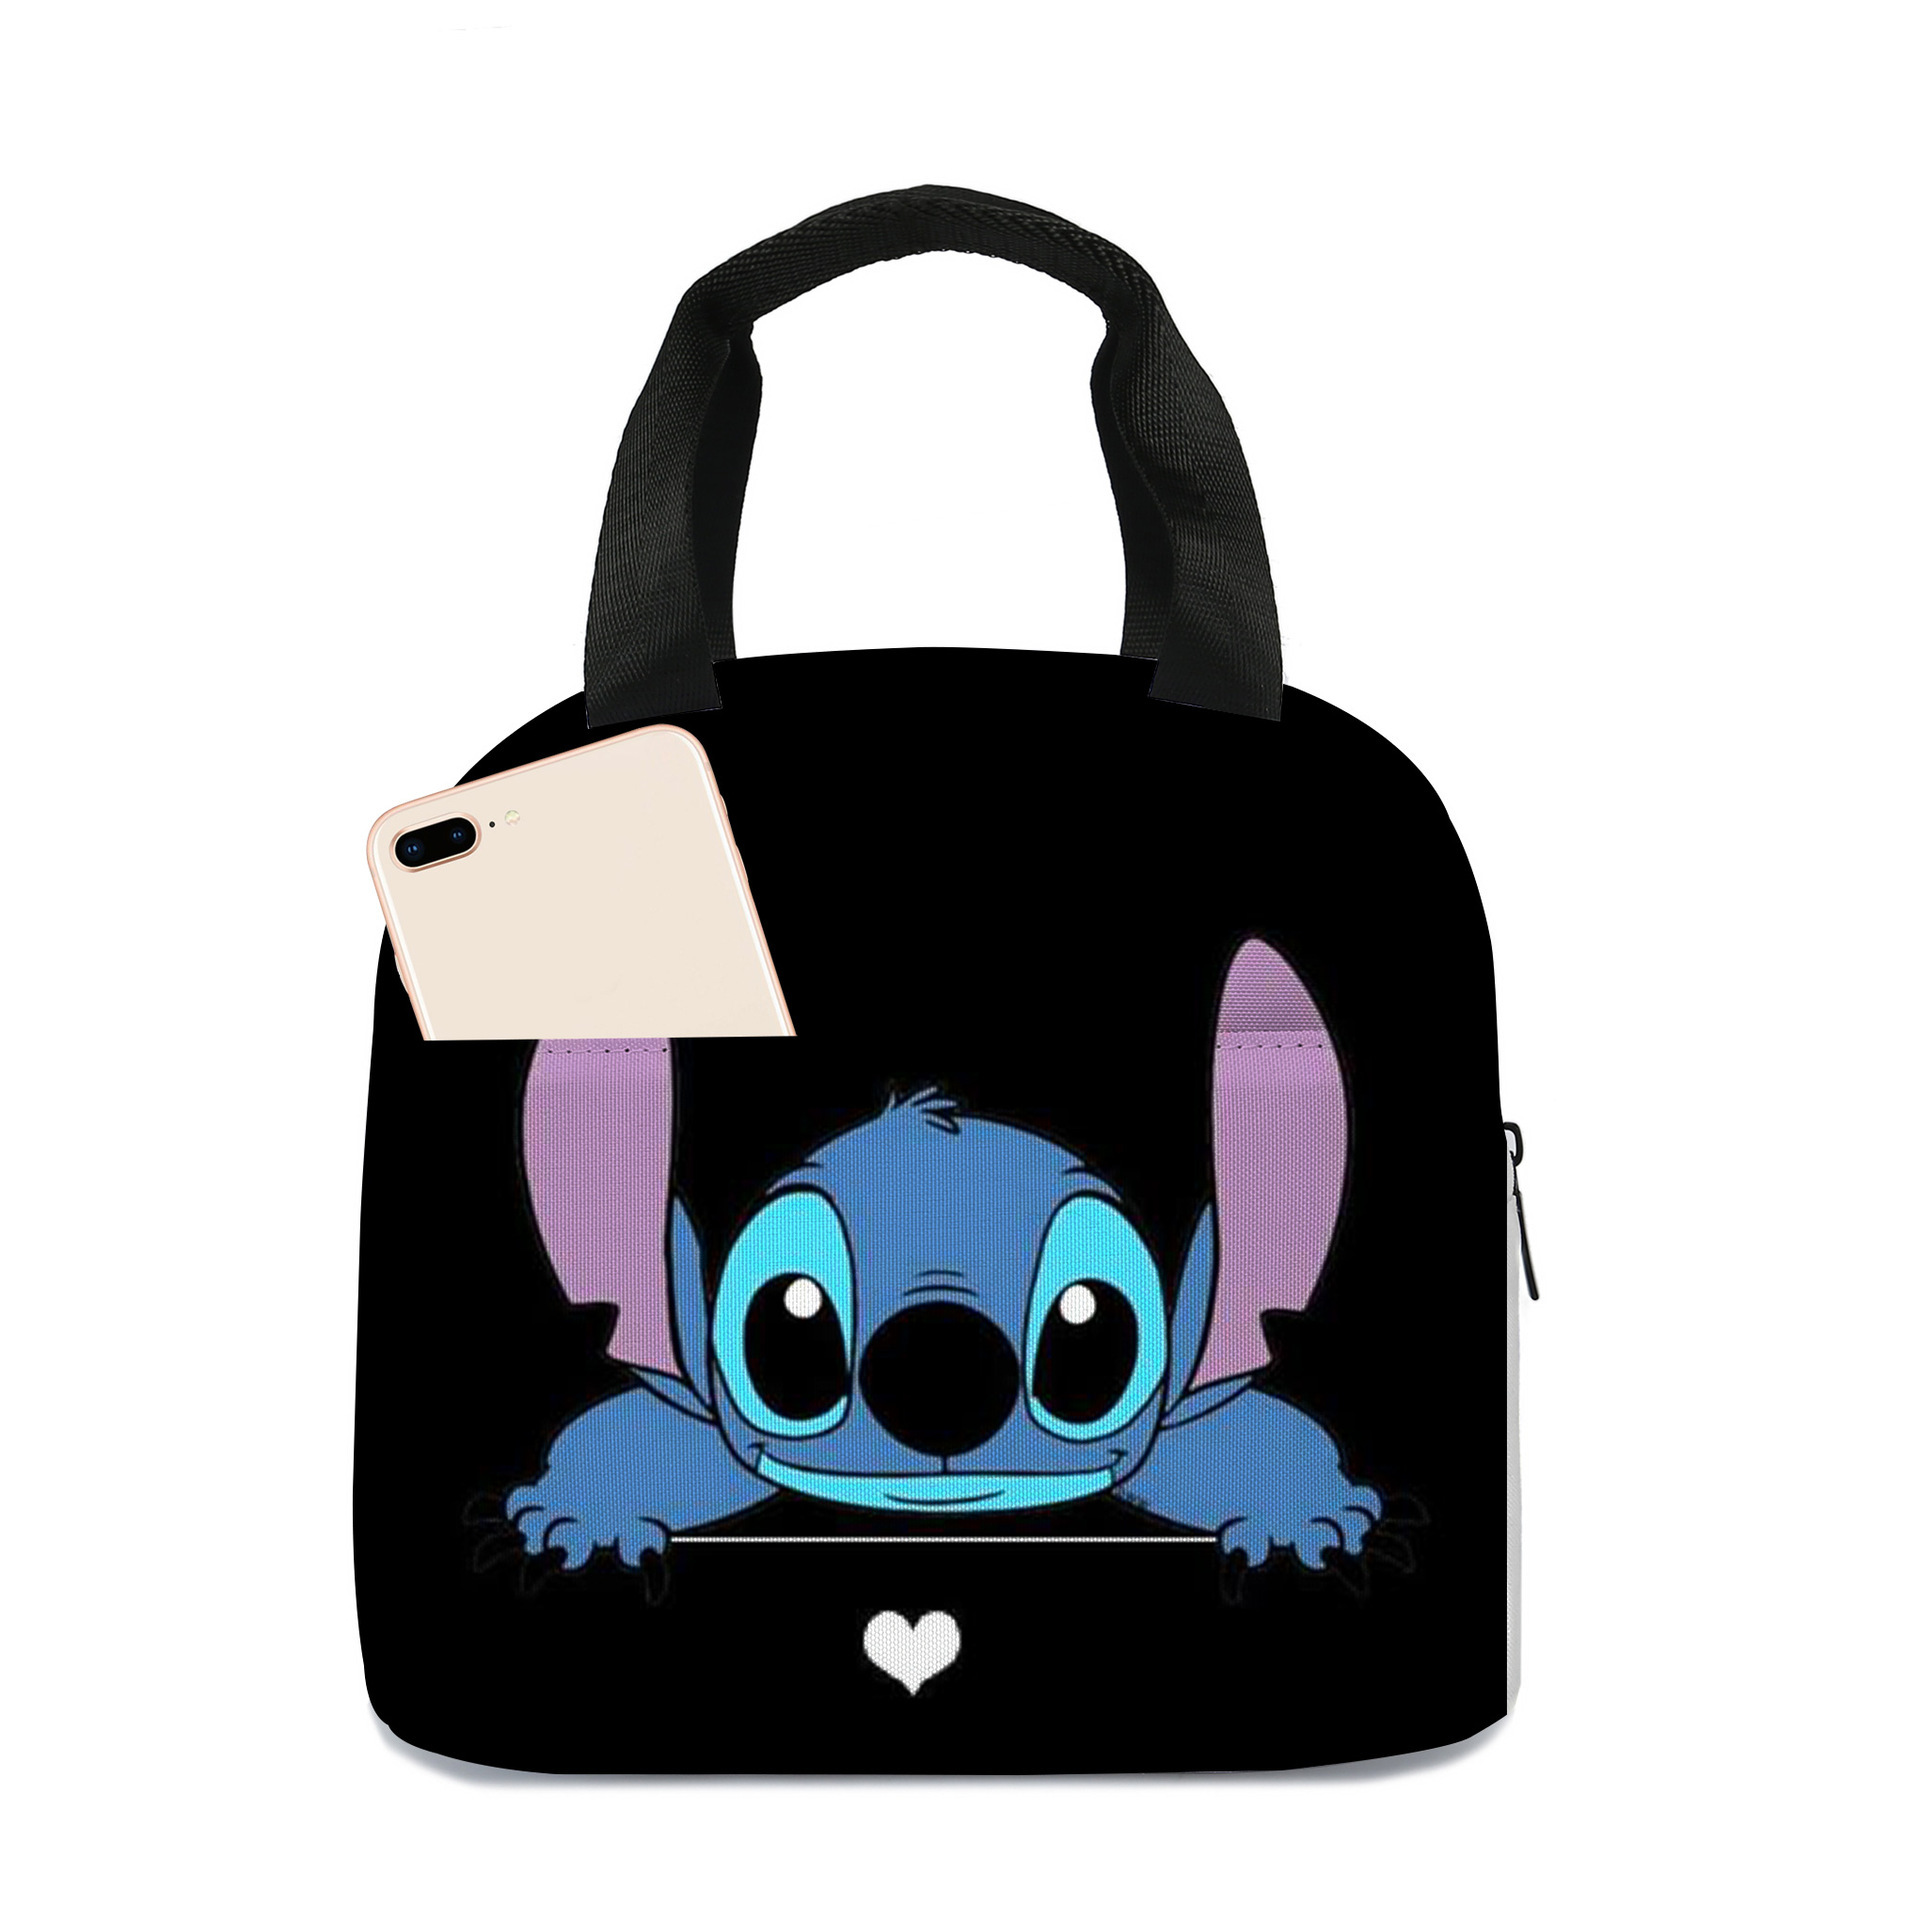 Products in Stock New Cartoon Stitch Stitch Children Lunch Bag Primary School Students Lunch Box Bag Ice Pack